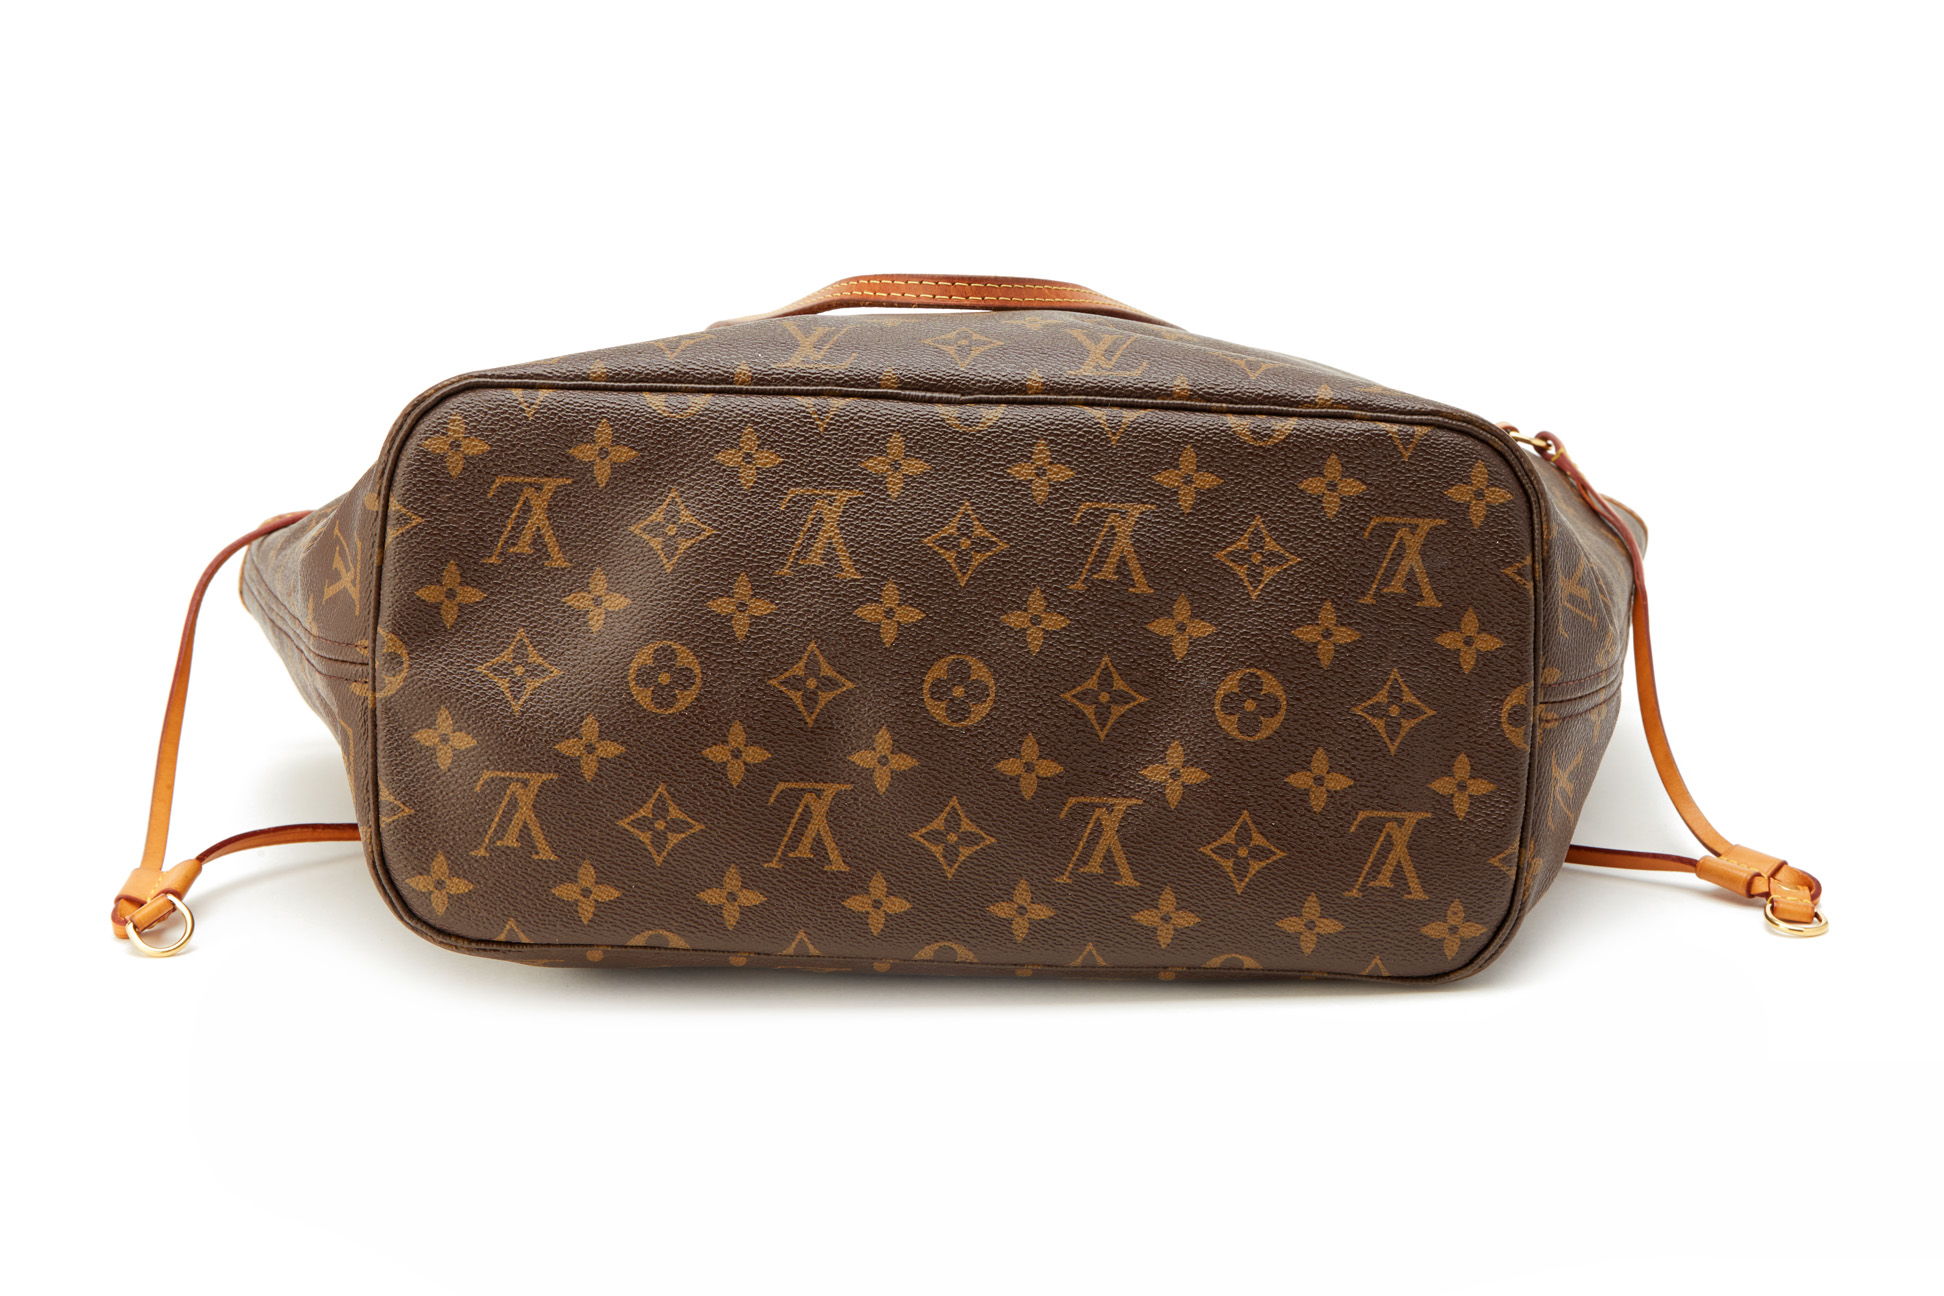 A LOUIS VUITTON BROWN MONOGRAM NEVERFULL BAG - Image 4 of 4